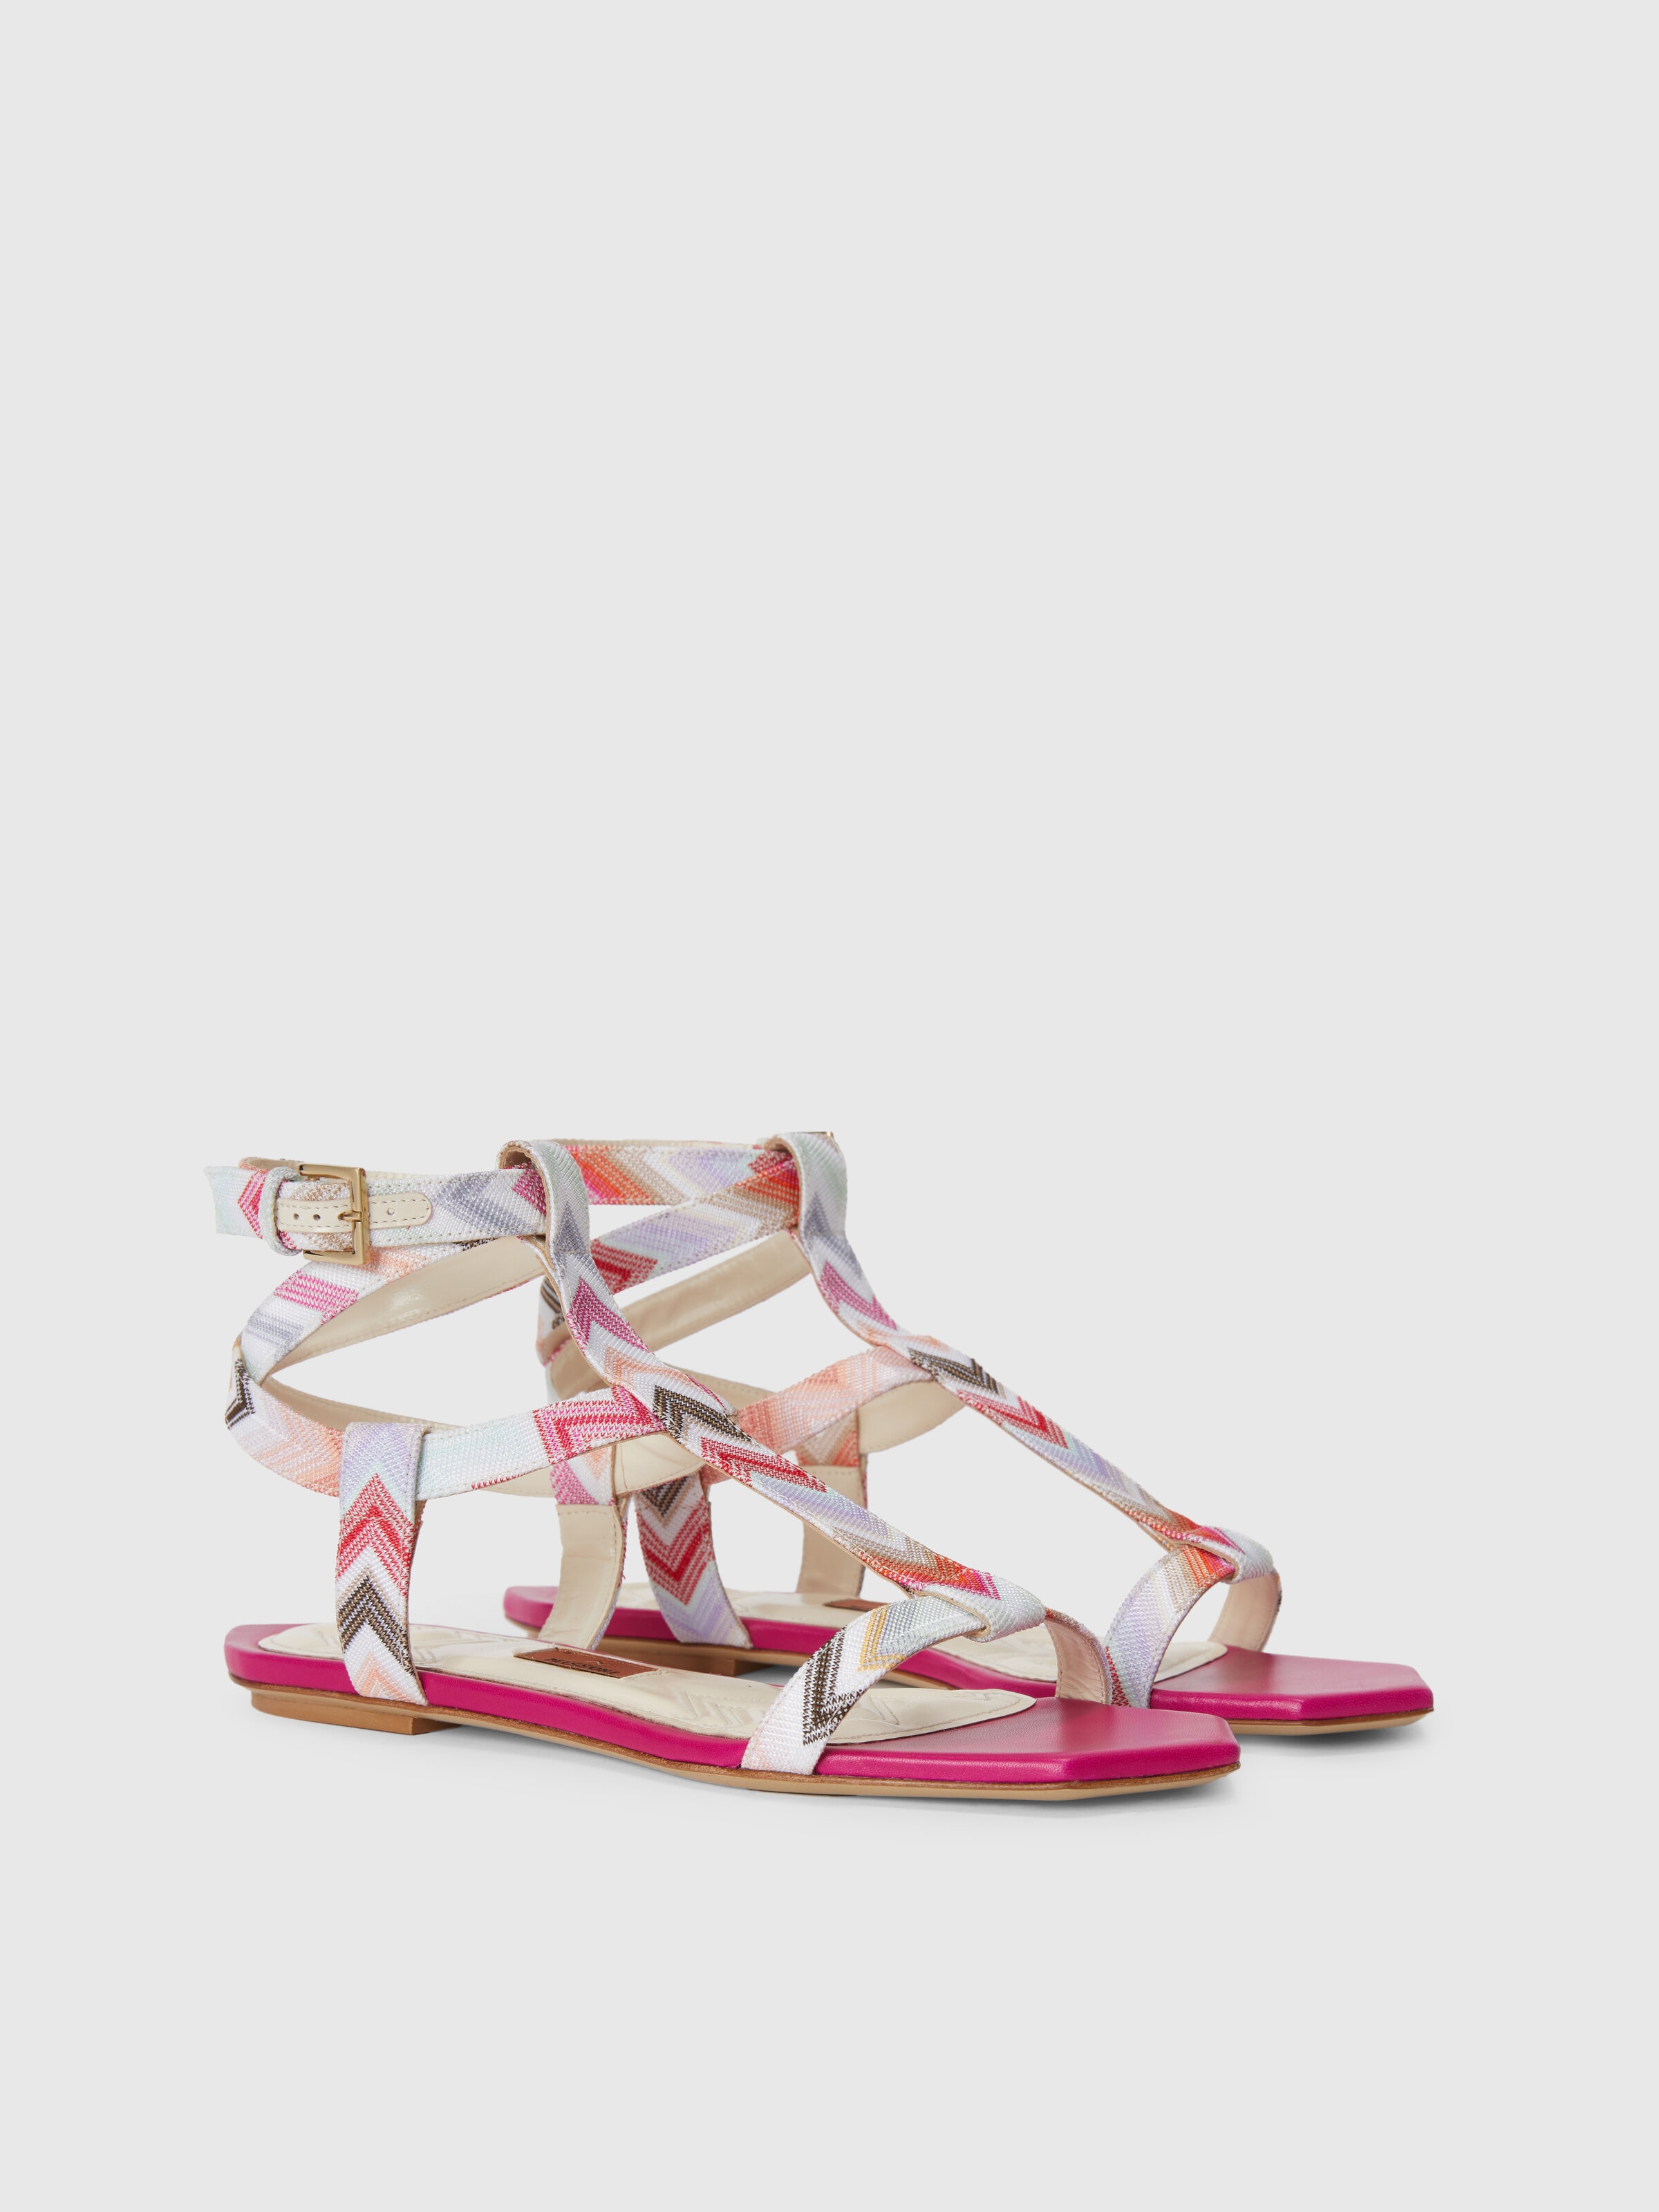 Low sandals in zigzag fabric, Pink   - 1